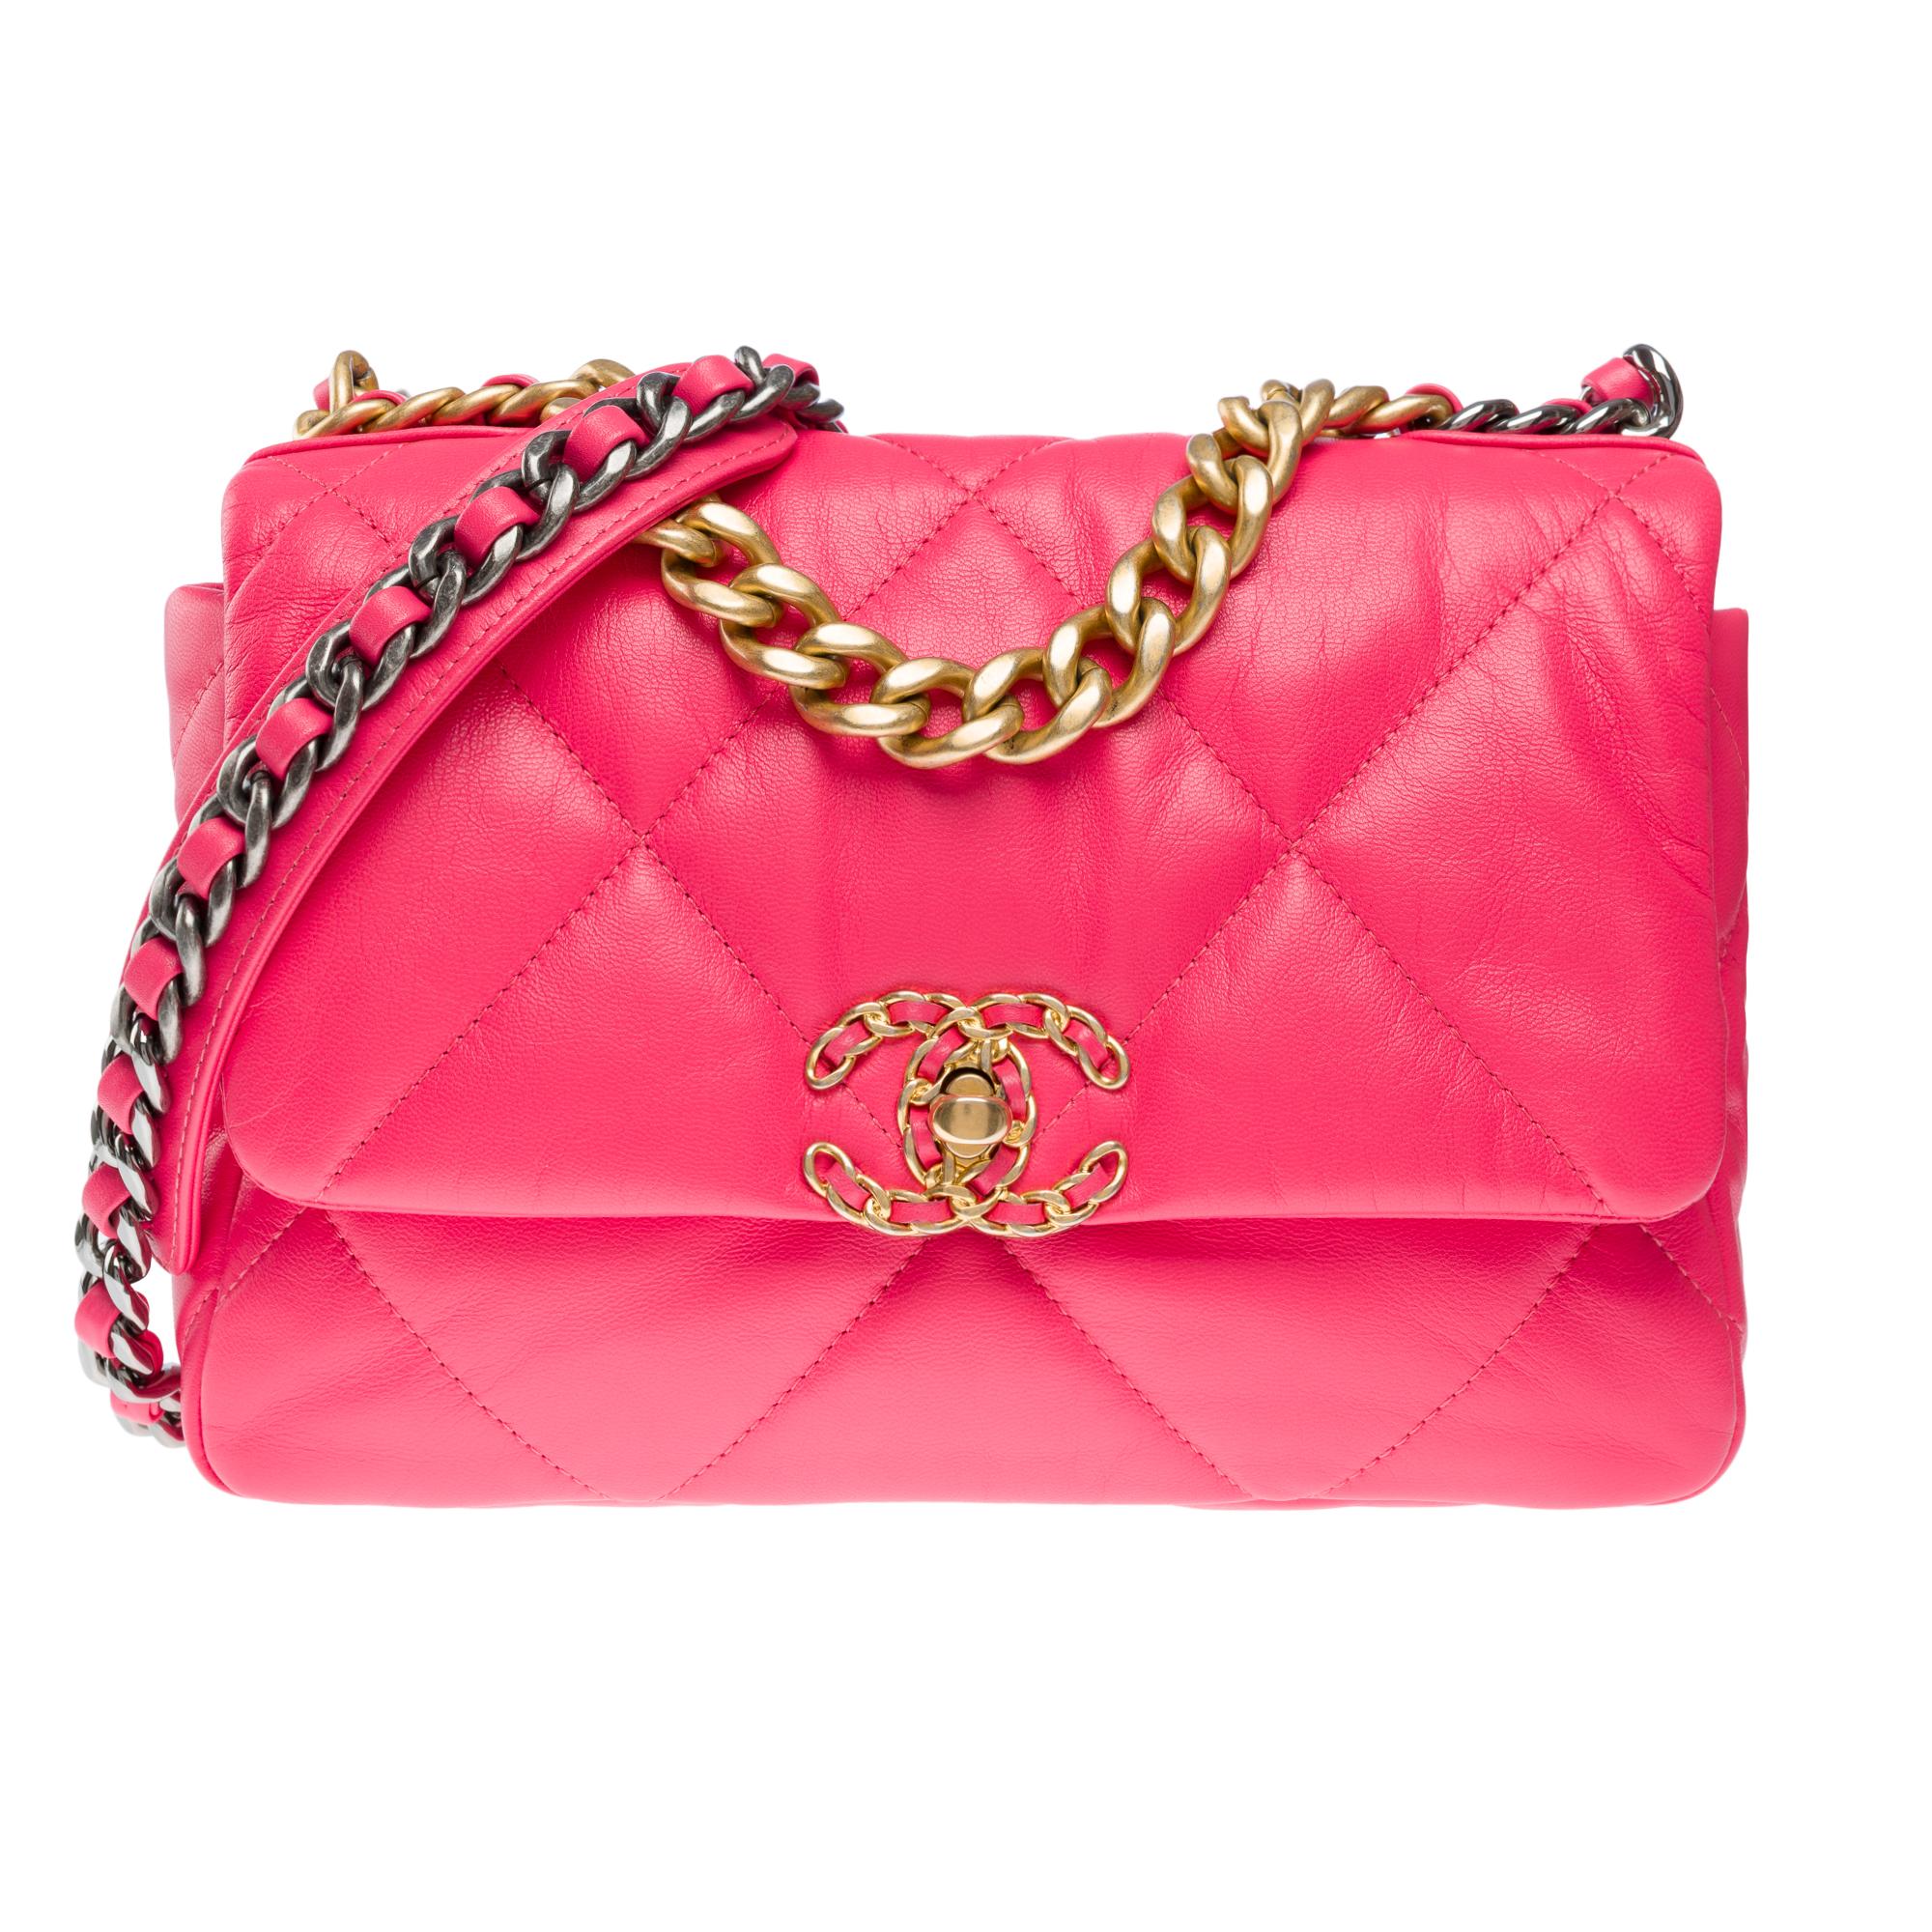 Women's Stunning Chanel 19 shoulder bag in Pink quilted leather , Matt gold and SHW